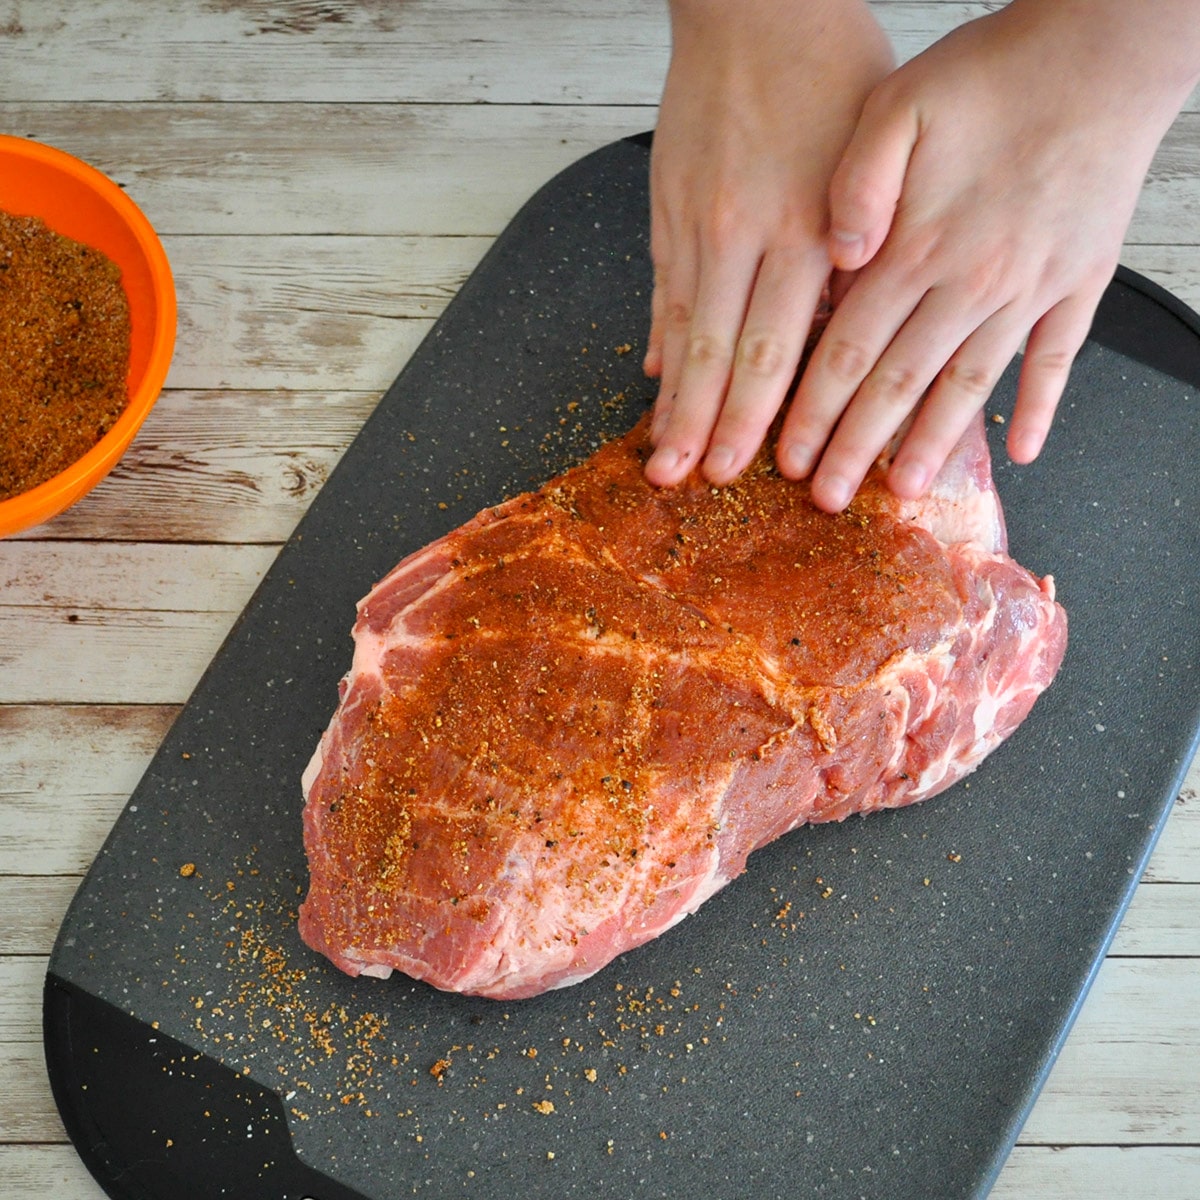 seasoning being rubbed into a pork shoulder